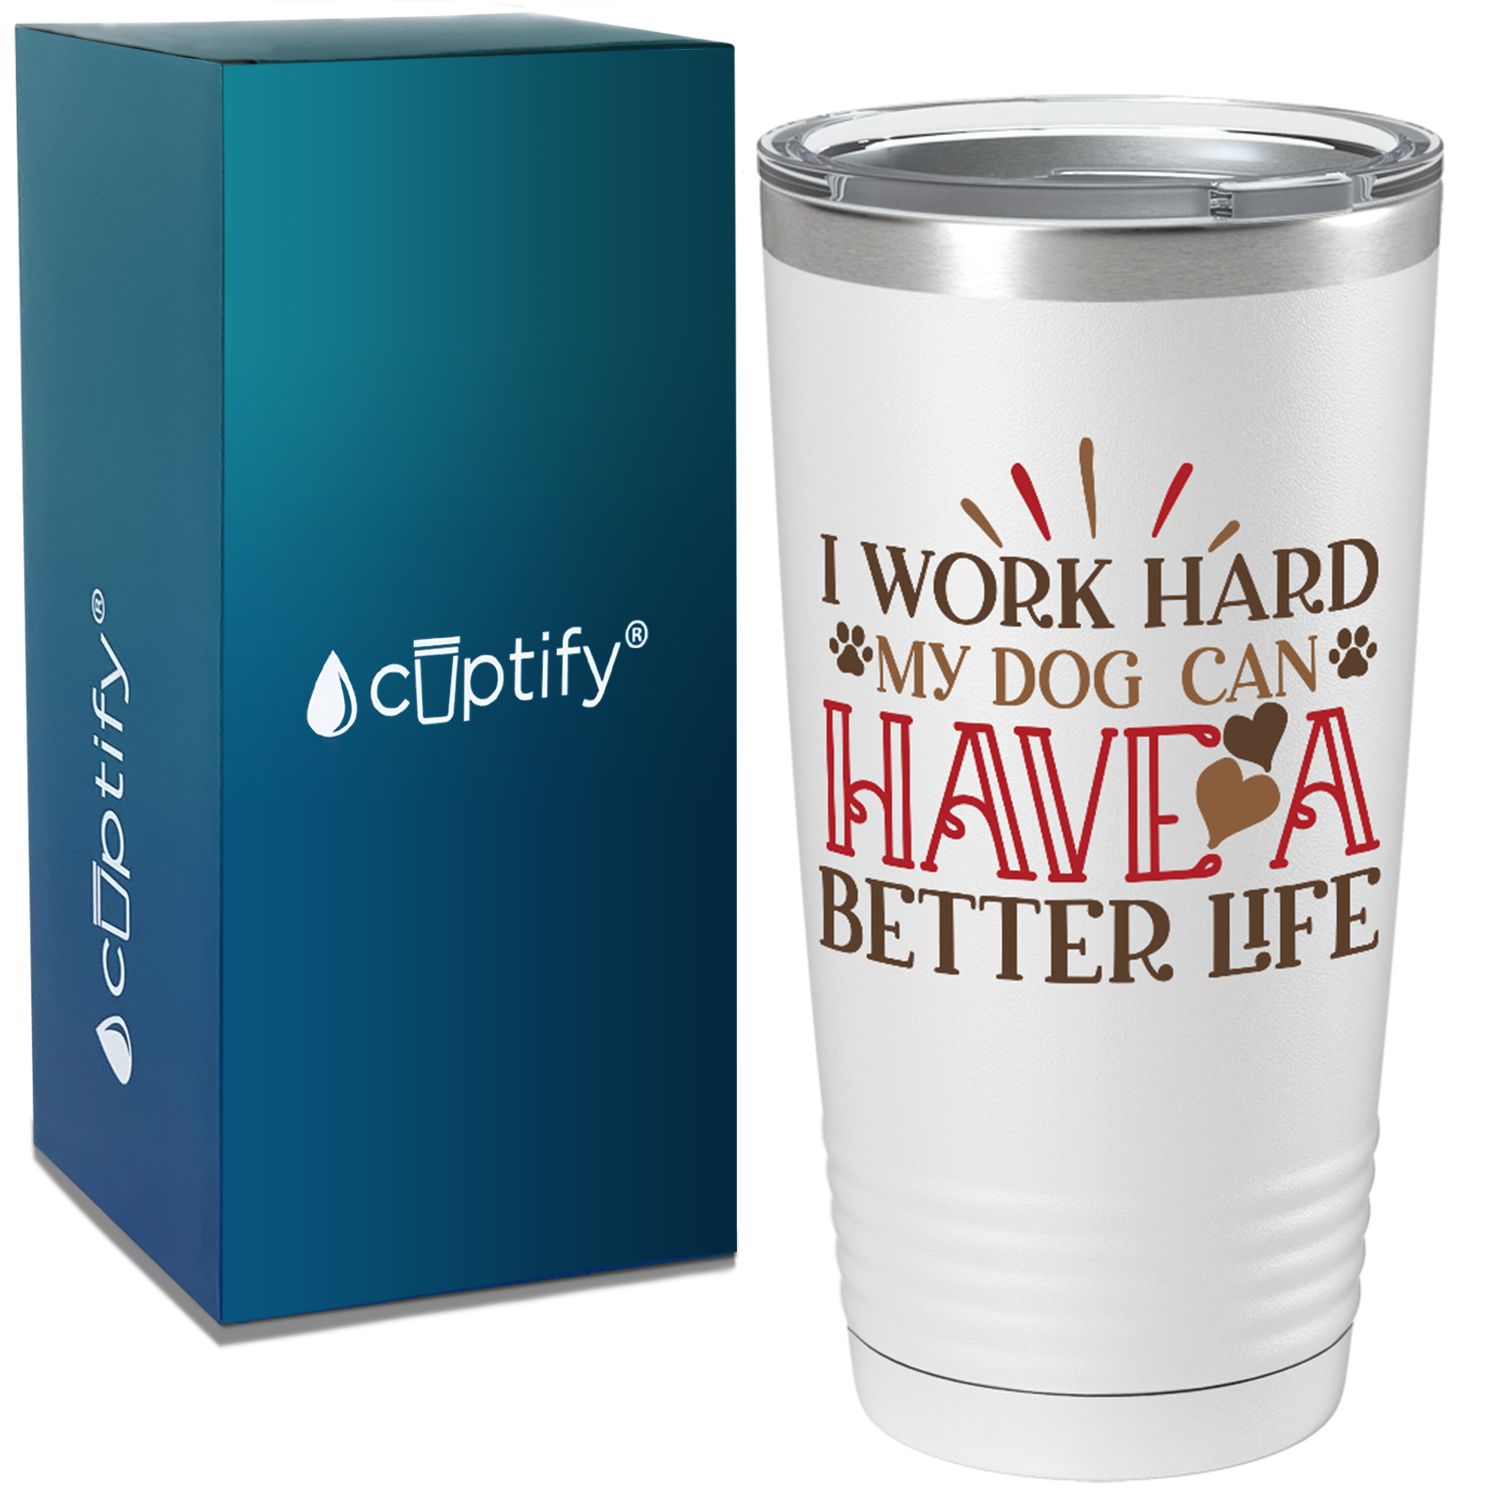 I Work Hard My Dog can have a Better Life on Dogs 20oz Tumbler